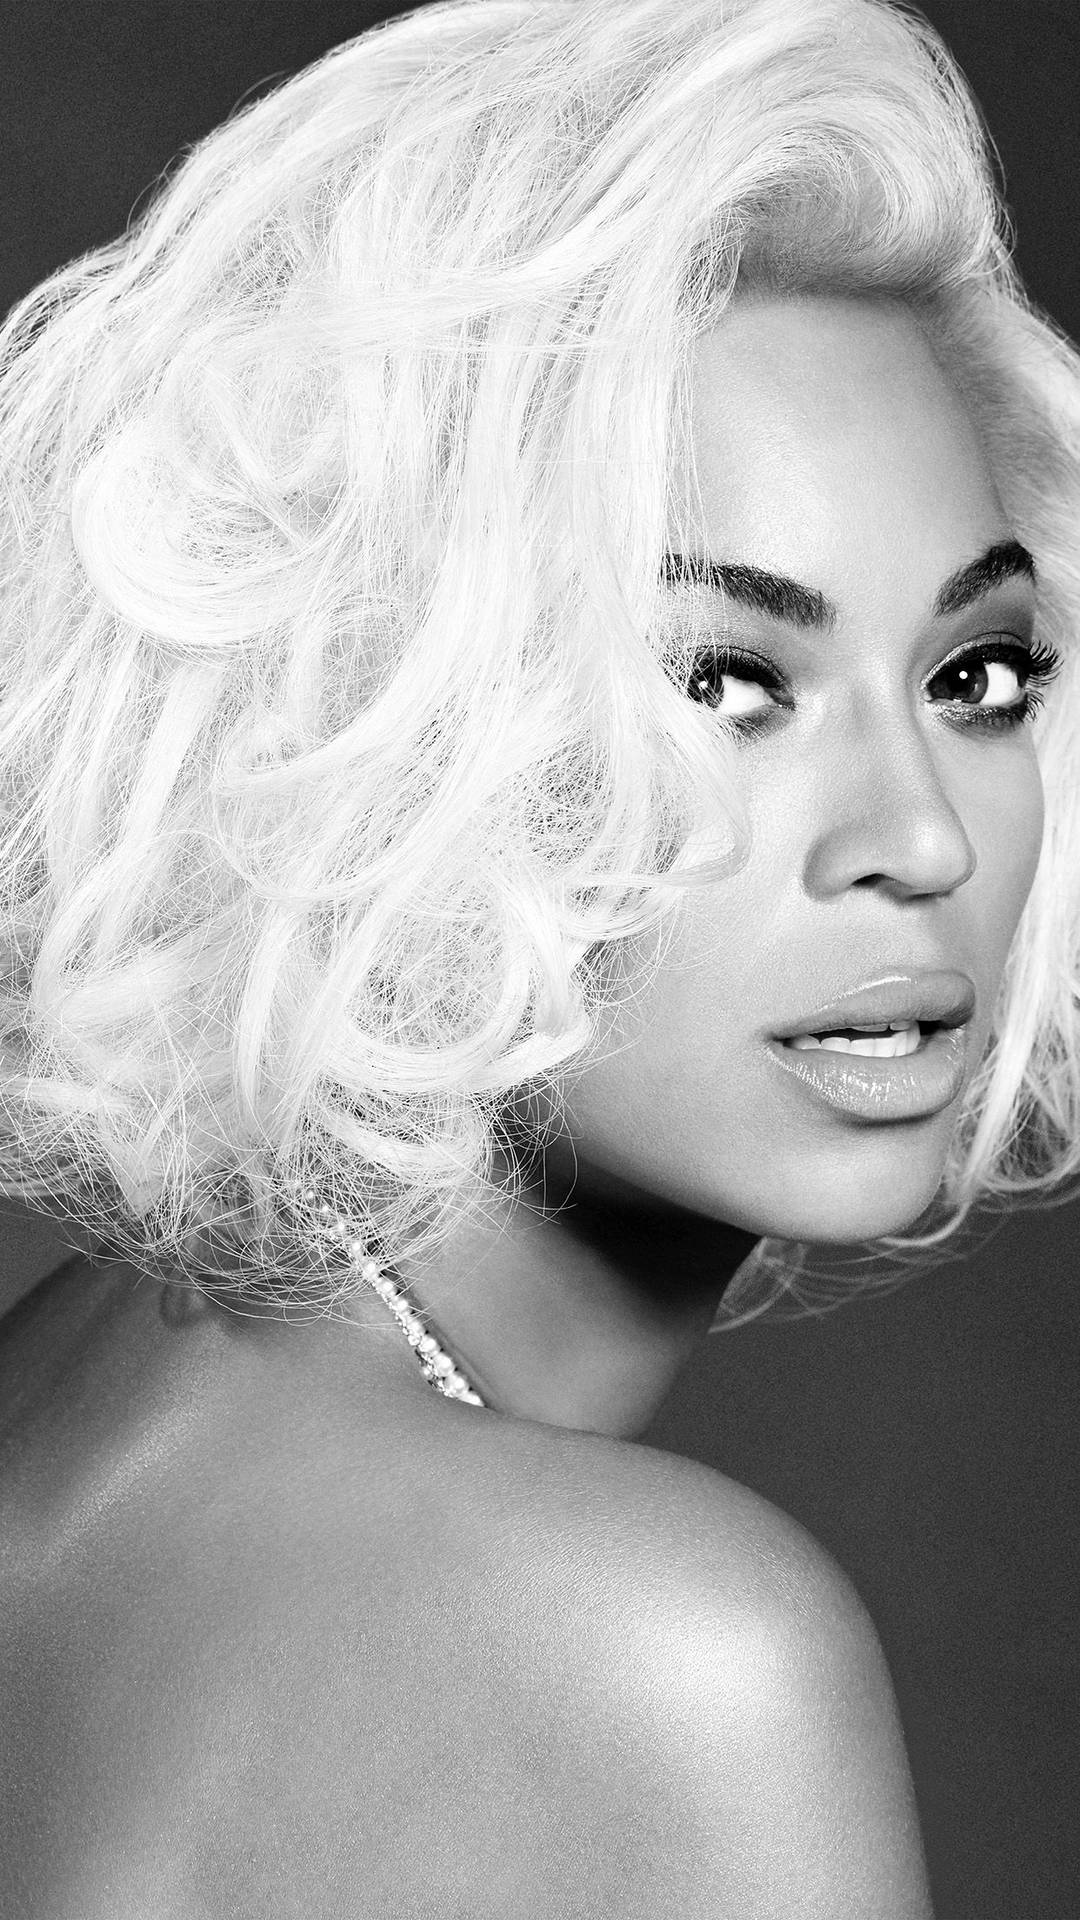 Beyonce strikes a pose with her iconic short bob. Wallpaper